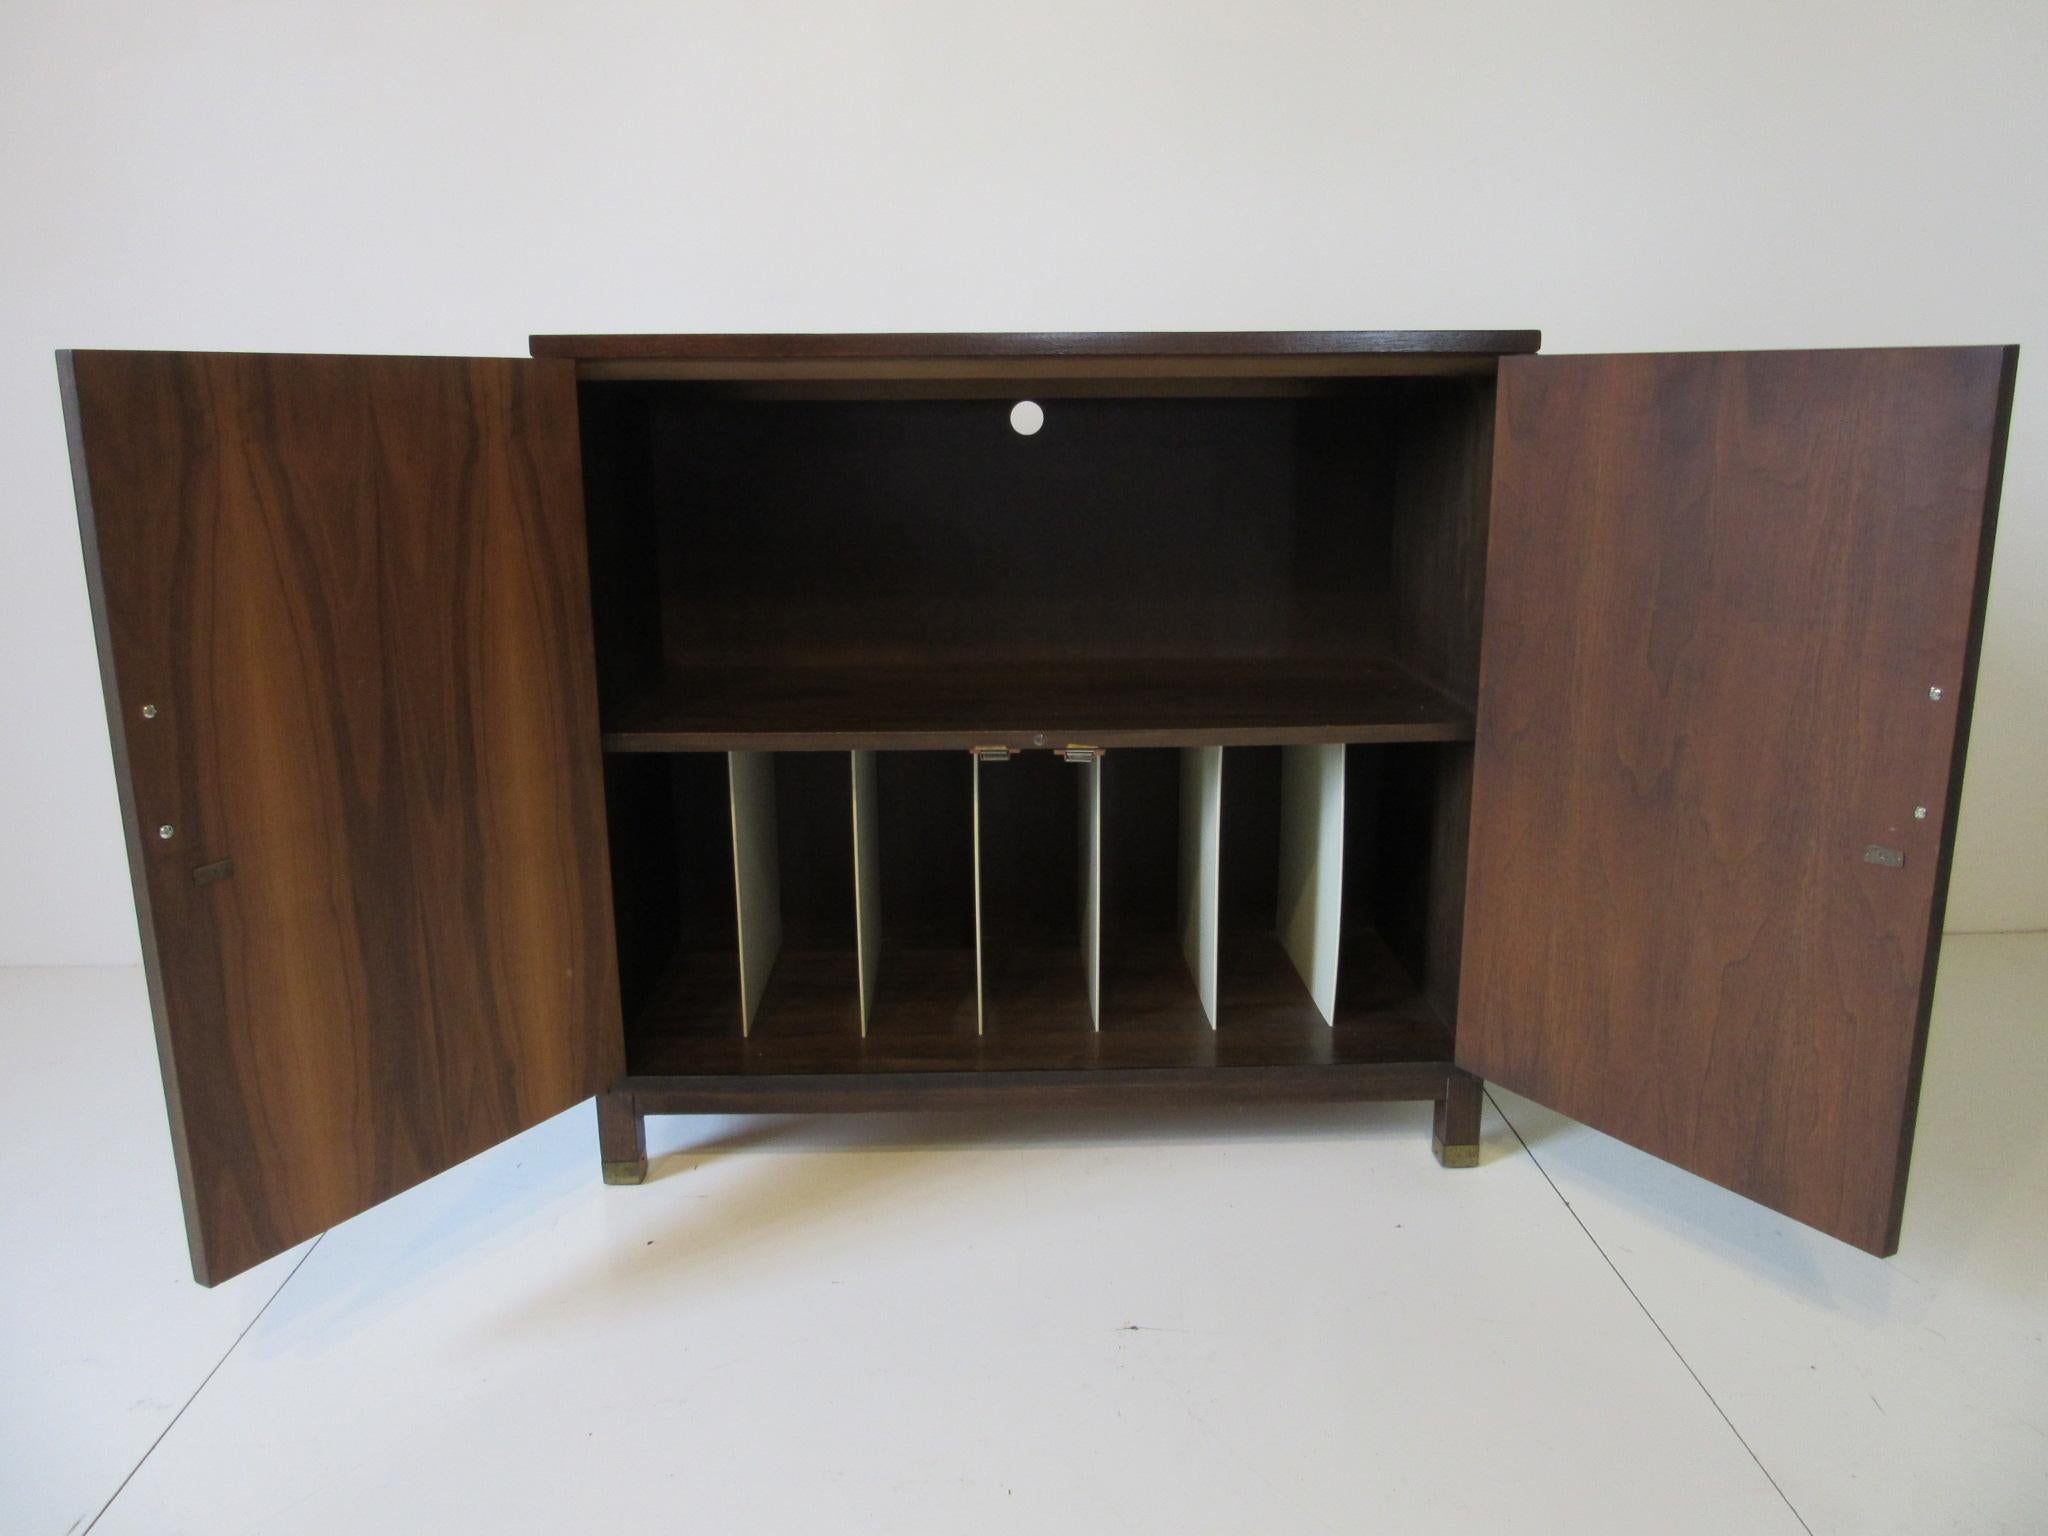 A dark walnut two door media cabinet with the upper area for stereo or other equipment , has a pre-drilled hole for cords and the lower area has dividers for your LP records. The handles to the doors are brass as are the bottom leg caps, this piece